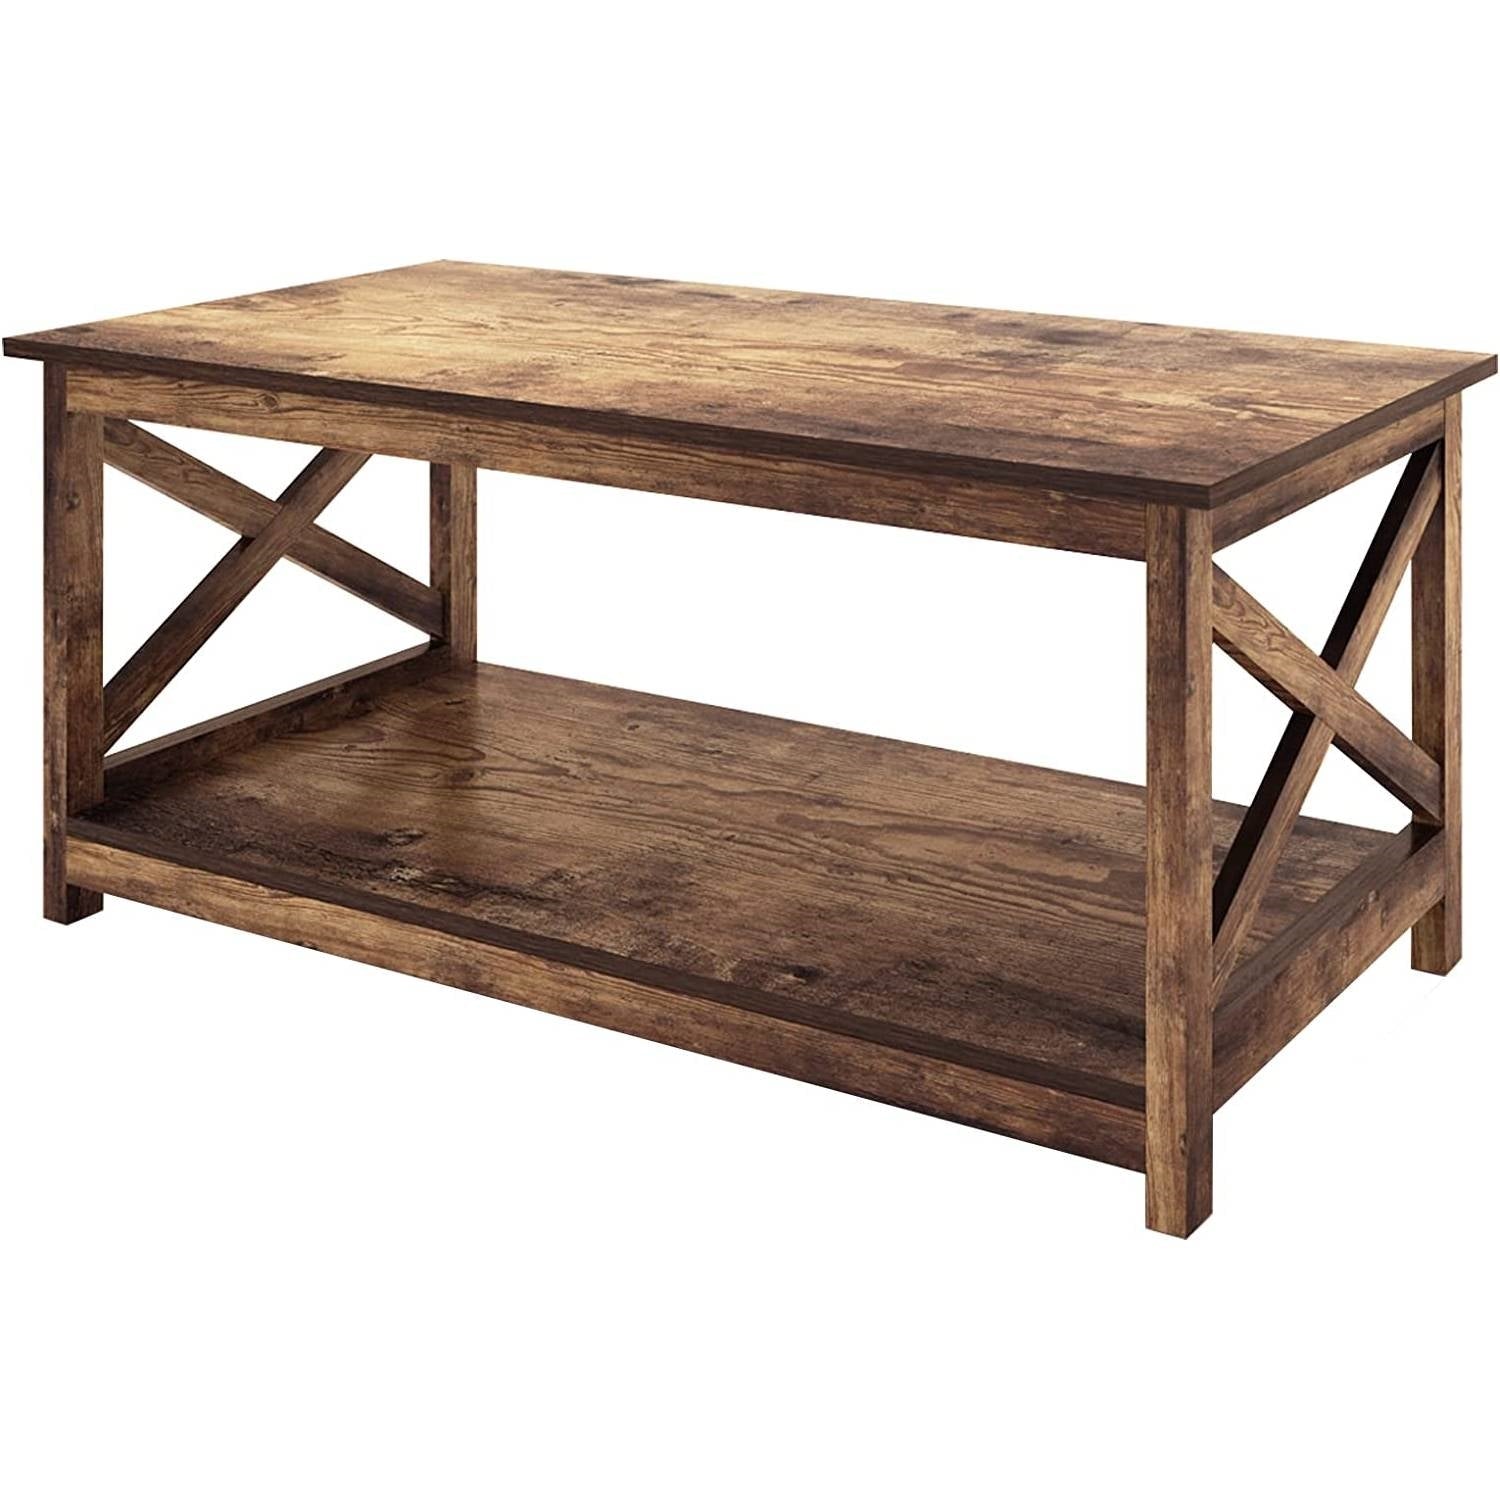 Living Room > Coffee Tables - Contemporary 2-Tier Farmhouse Coffee Table In Rustic Wood Finish